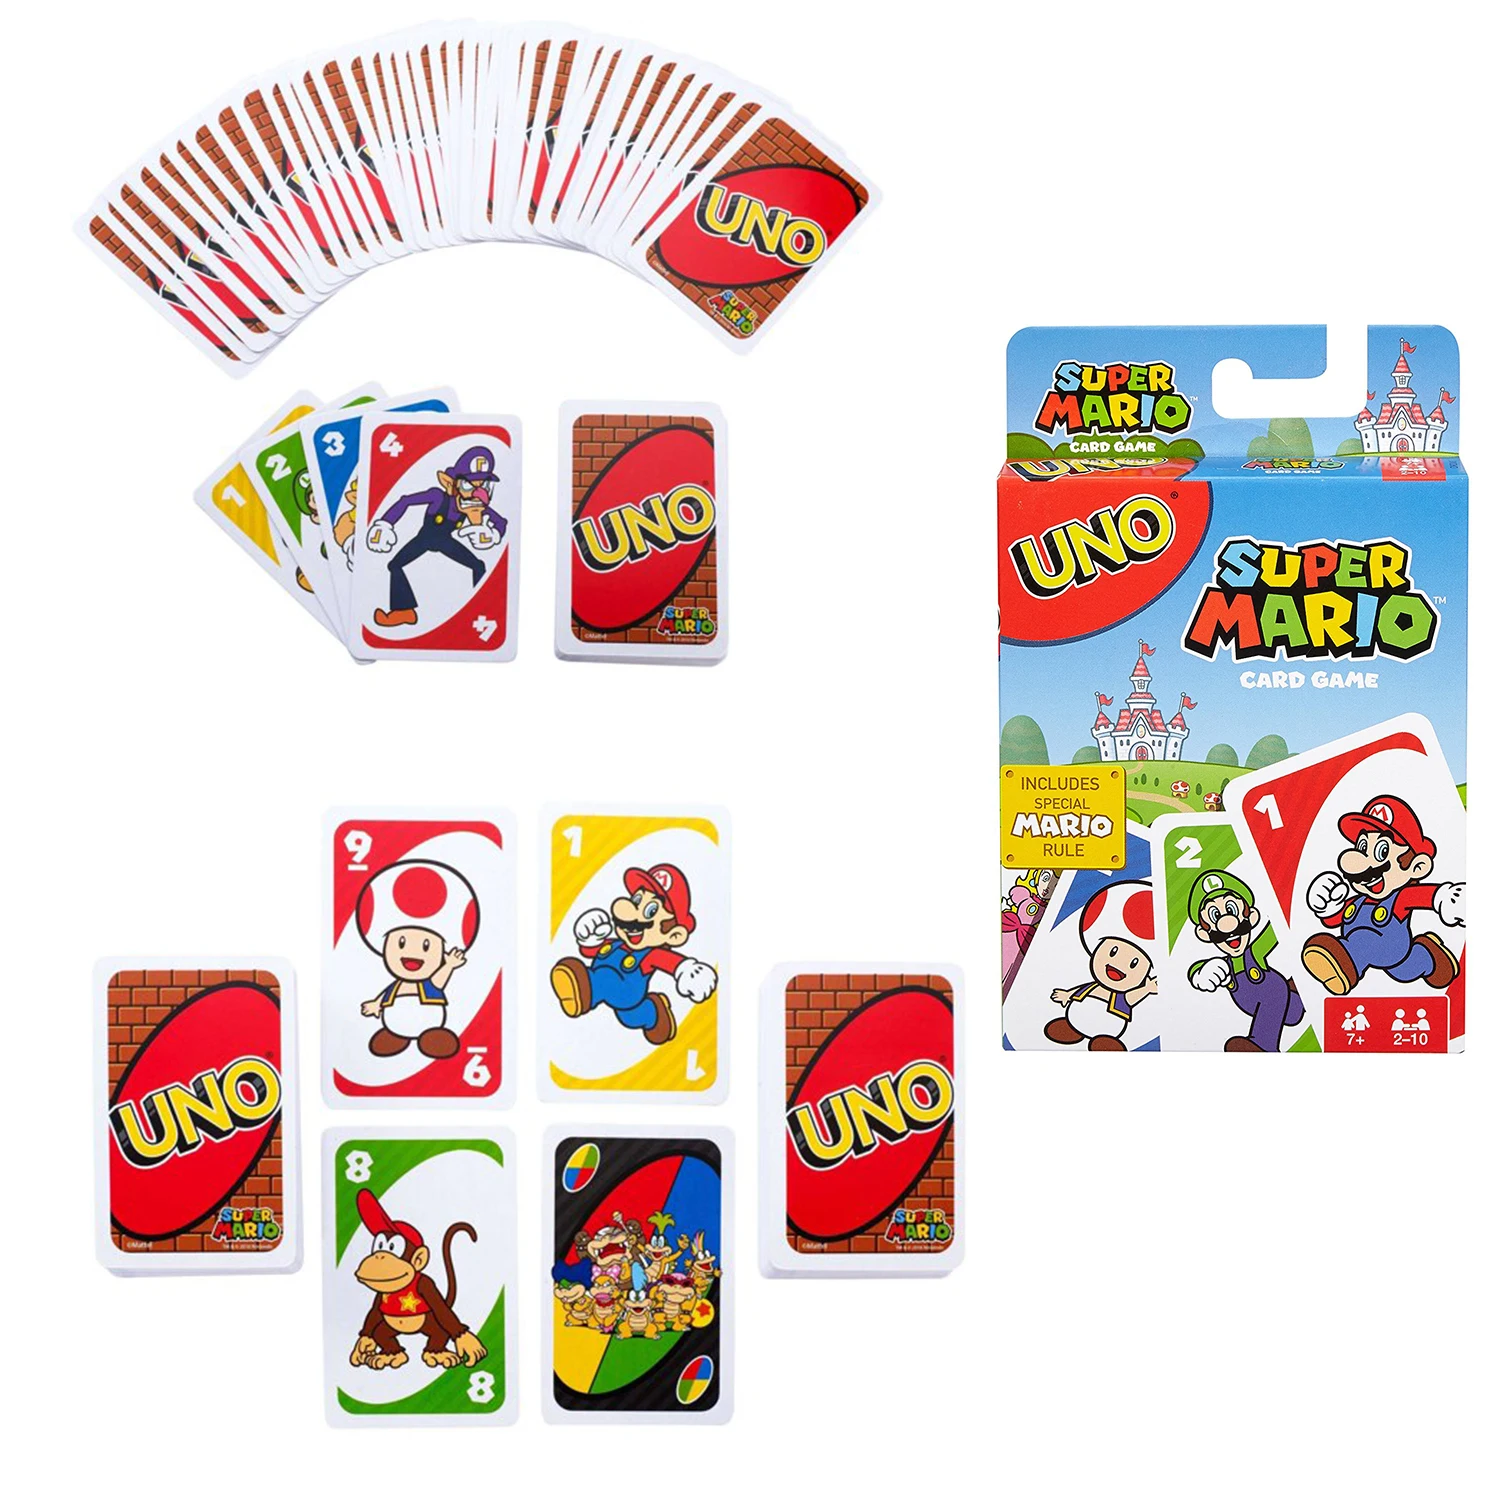 UNO Super Mario You Super Mario Bros and a Game of UNO Mattel Games Family FunnyBoard Game Poker Kids Toys Playing Cards